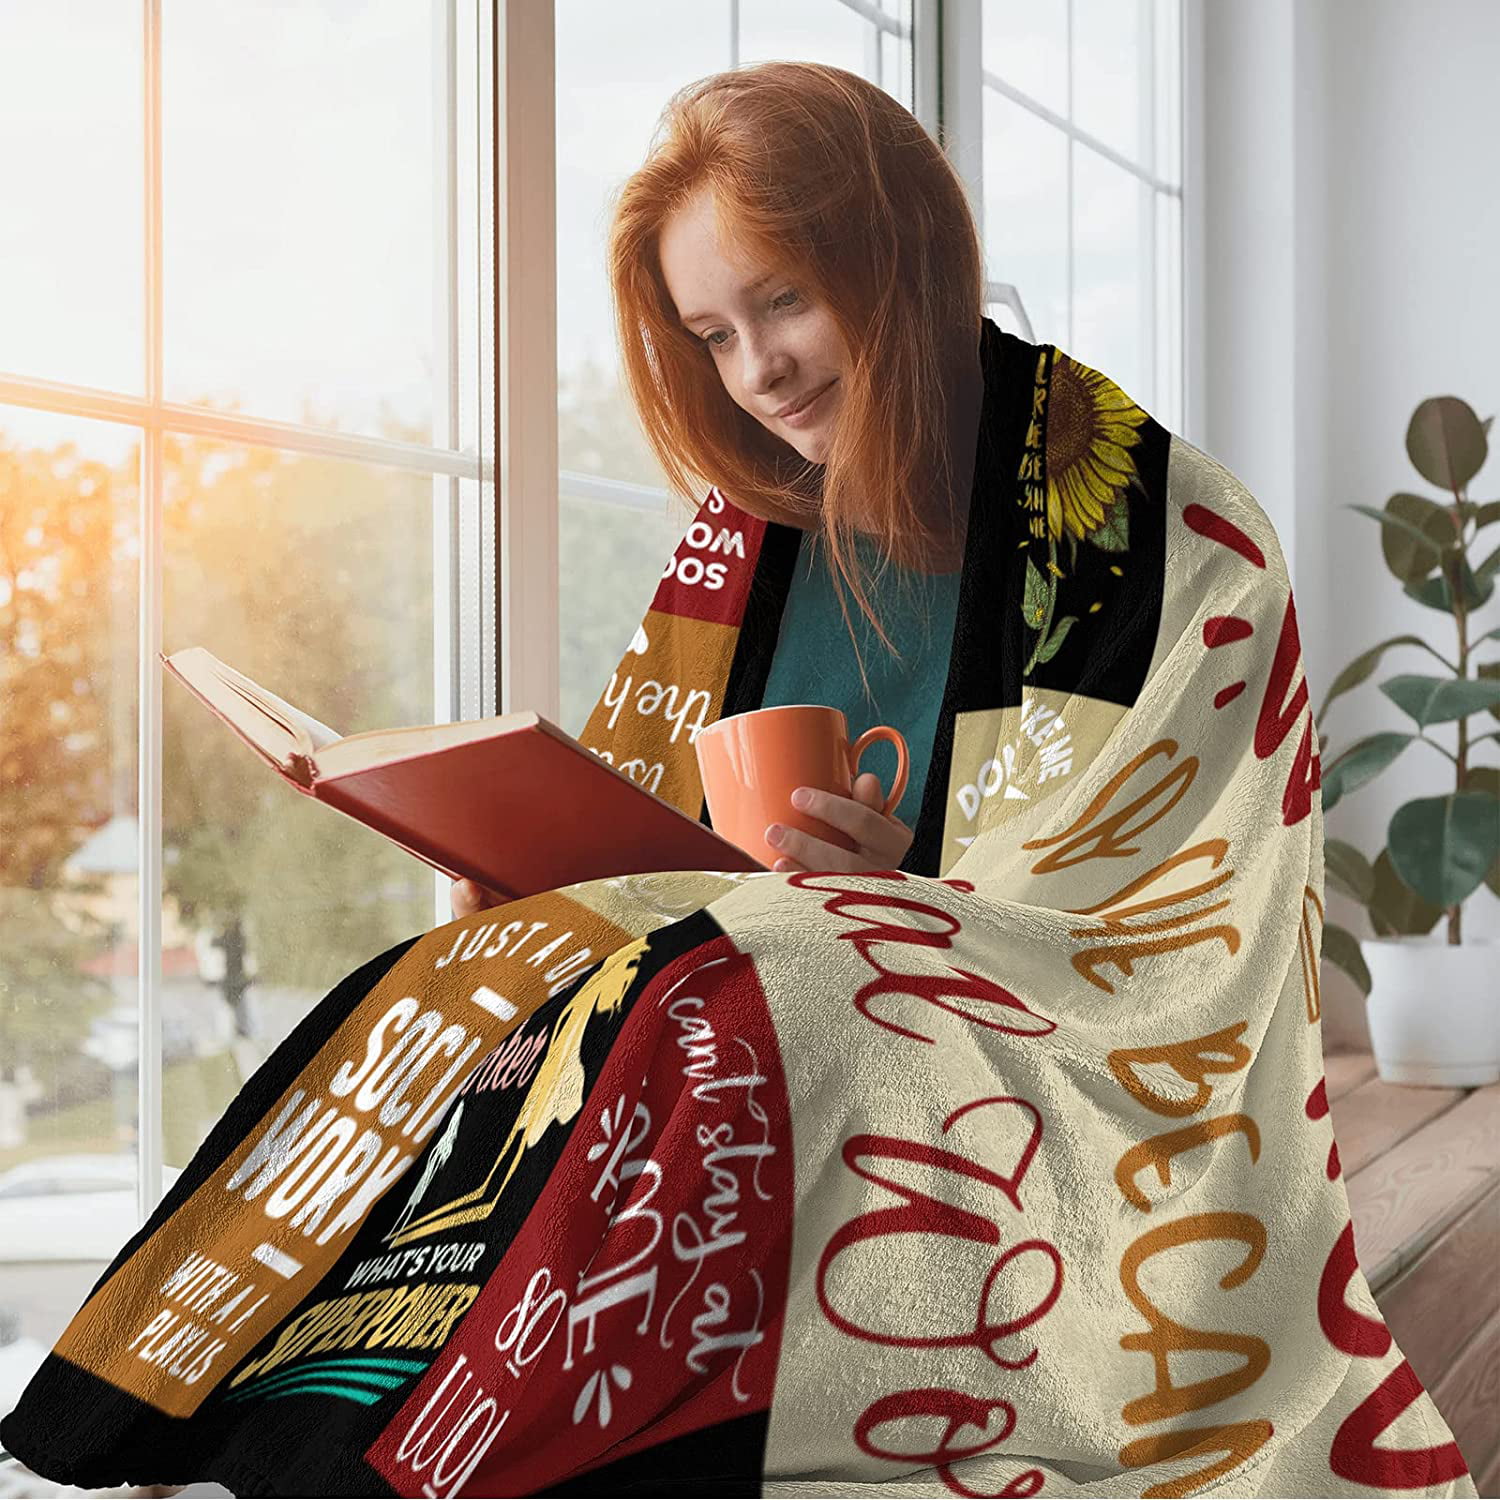 Social Worker Gifts for Women Office, Social Worker Appreciation Gifts,  Graduation Gift for BSW, MSW, DSW, Social Work Month Gifts for Social  Workers, Thank You Gifts for Social Worker Blanket 60x50 